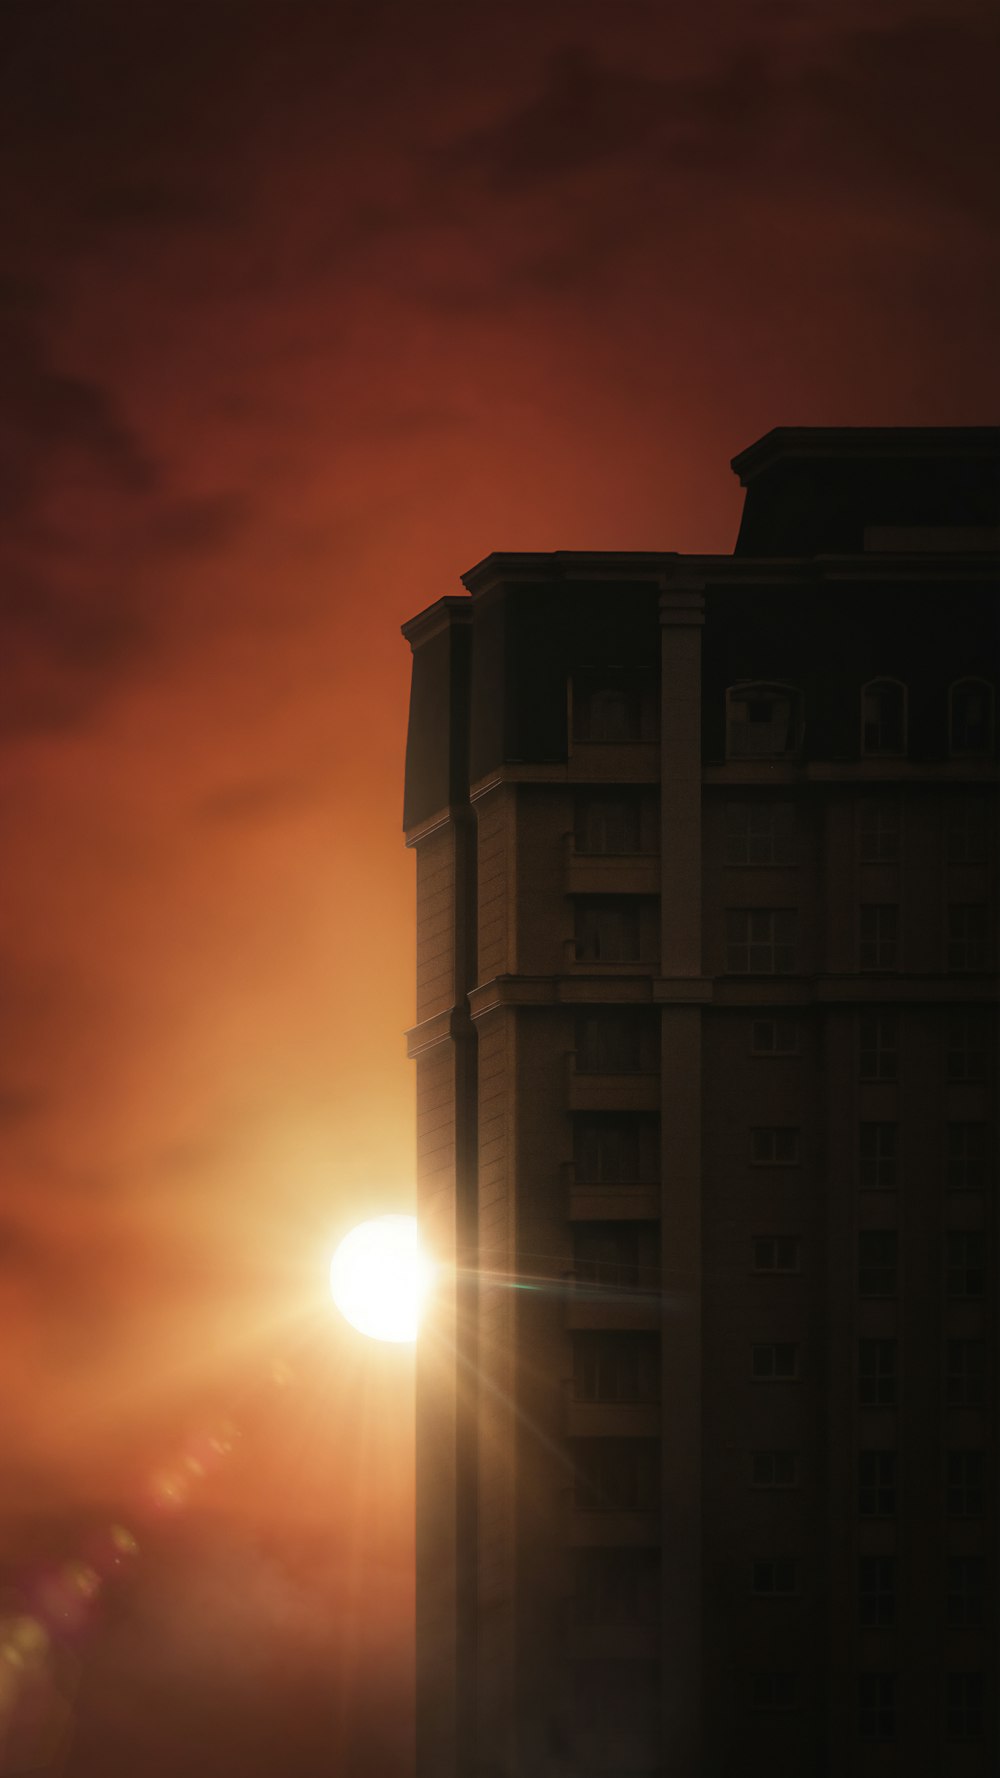 the sun is setting behind a tall building